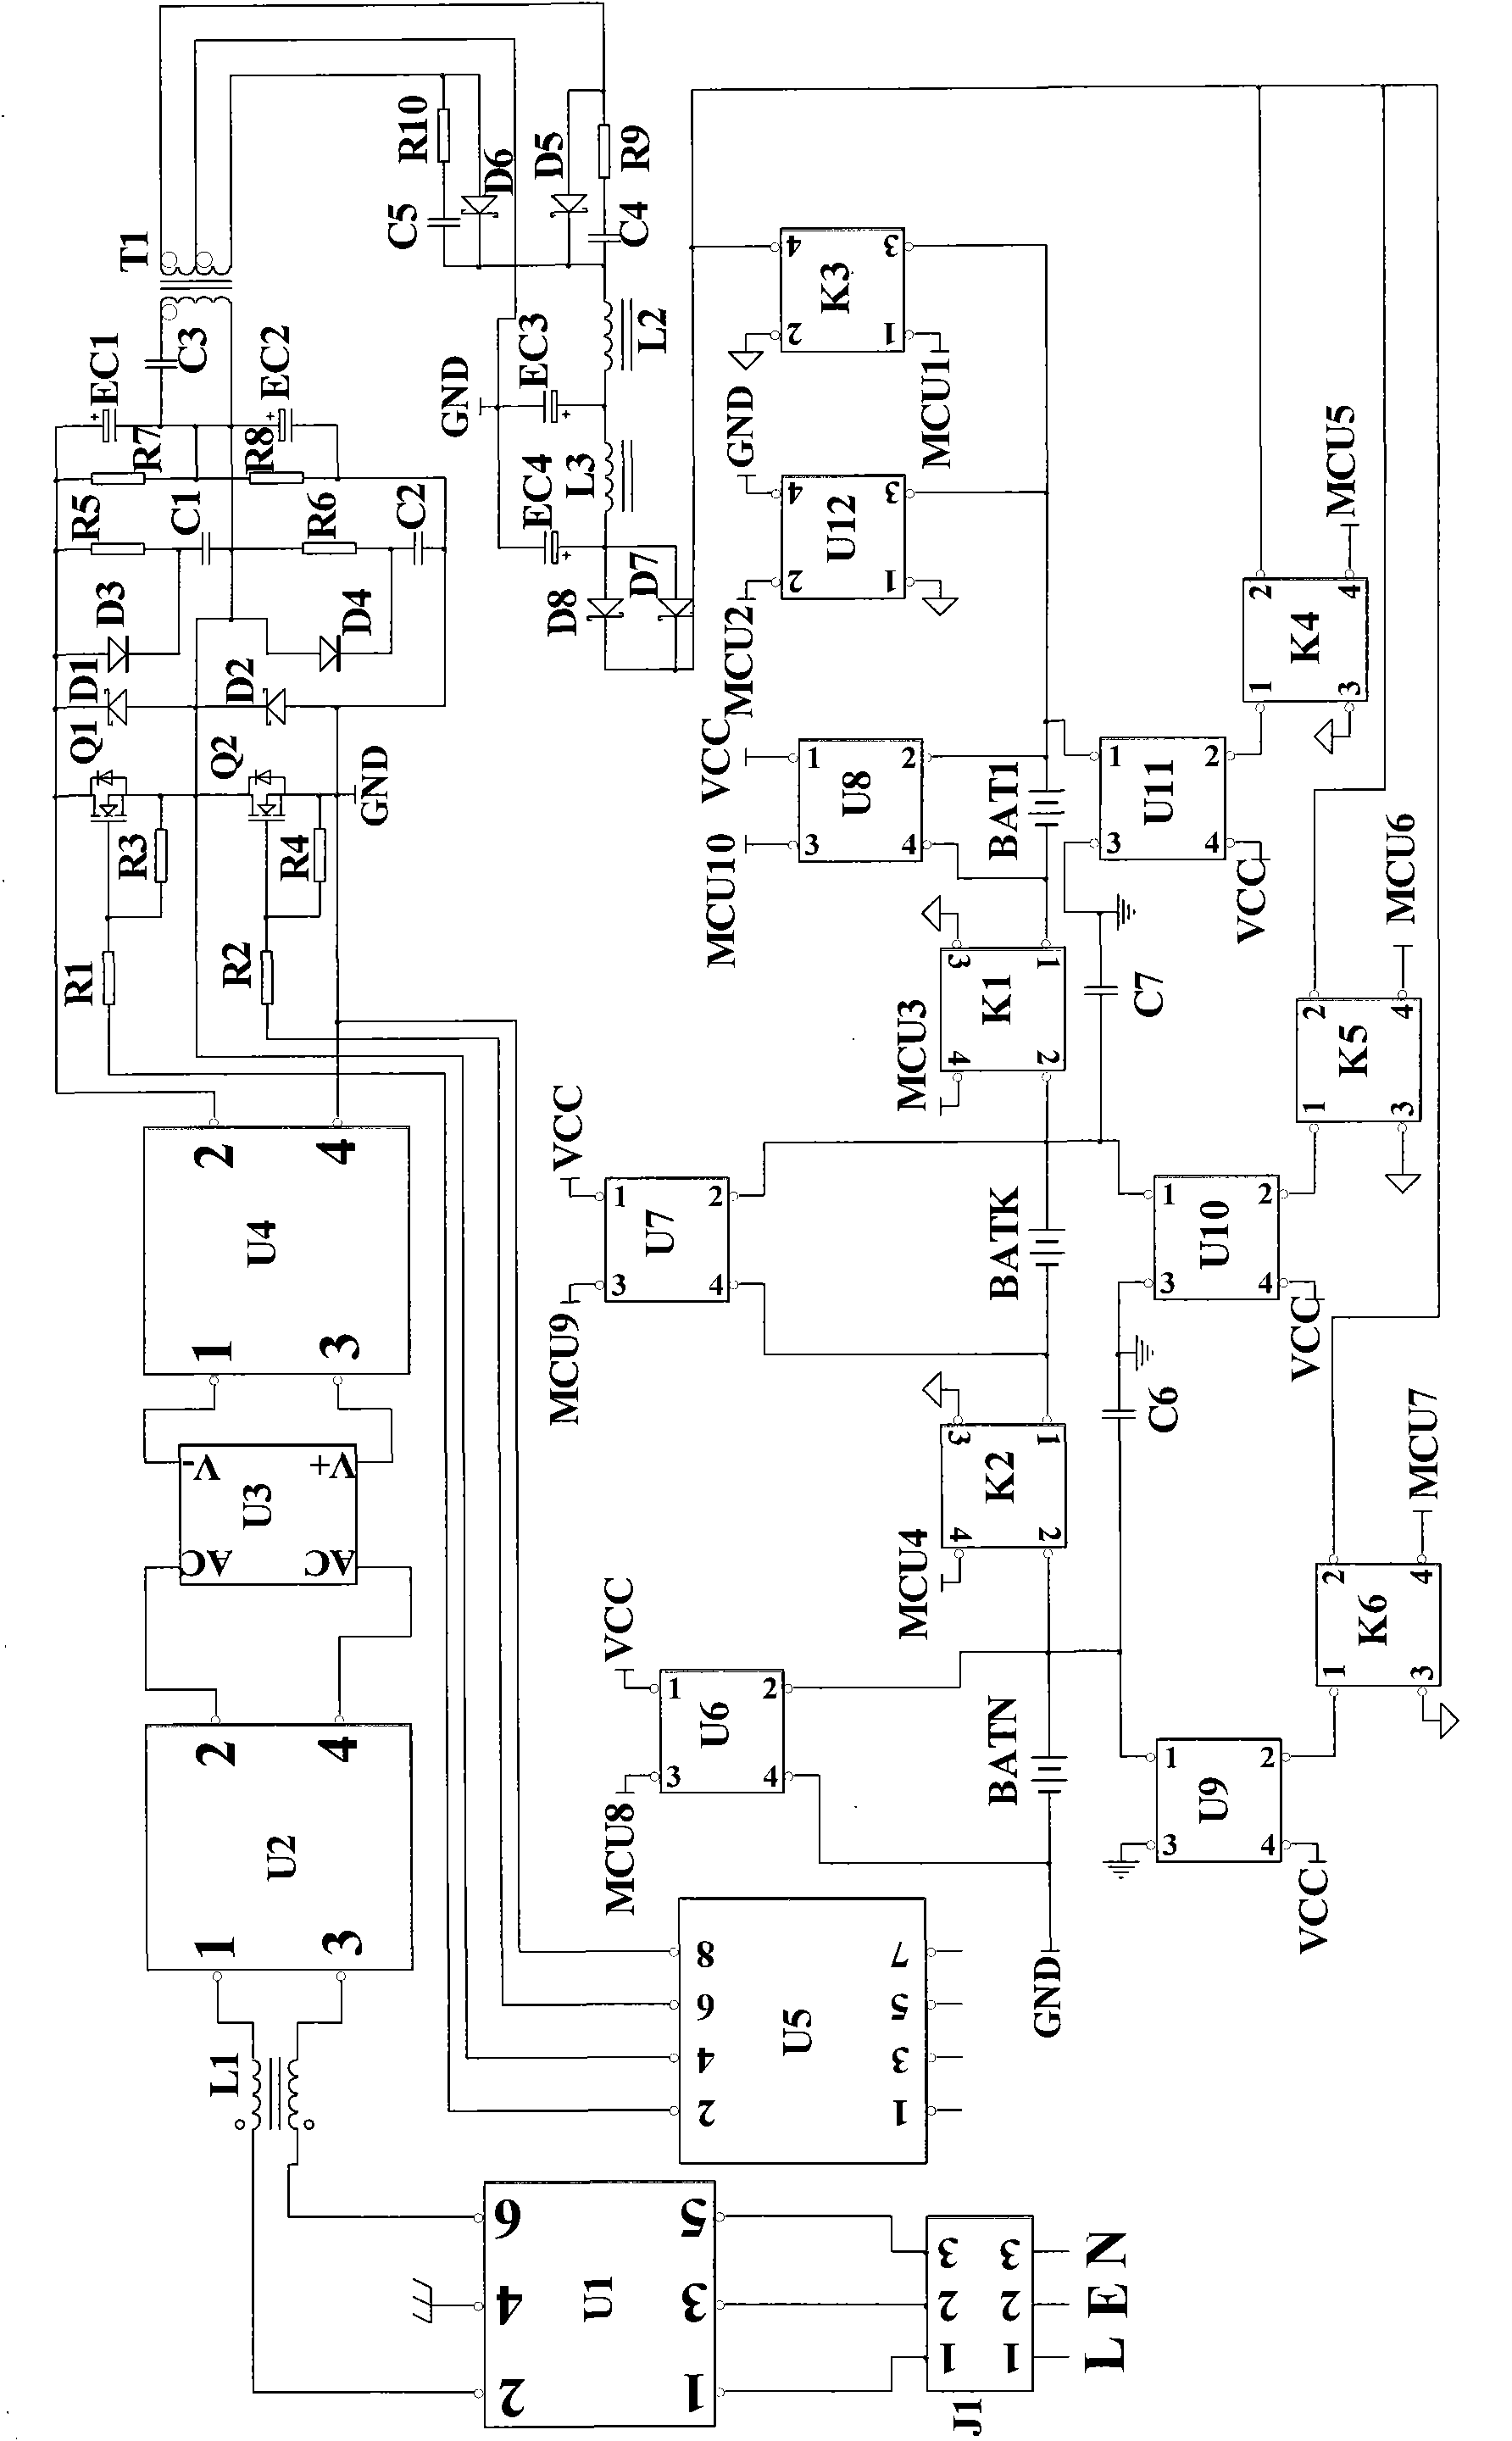 Control strategy of storage battery non-damage rapid balanced charger